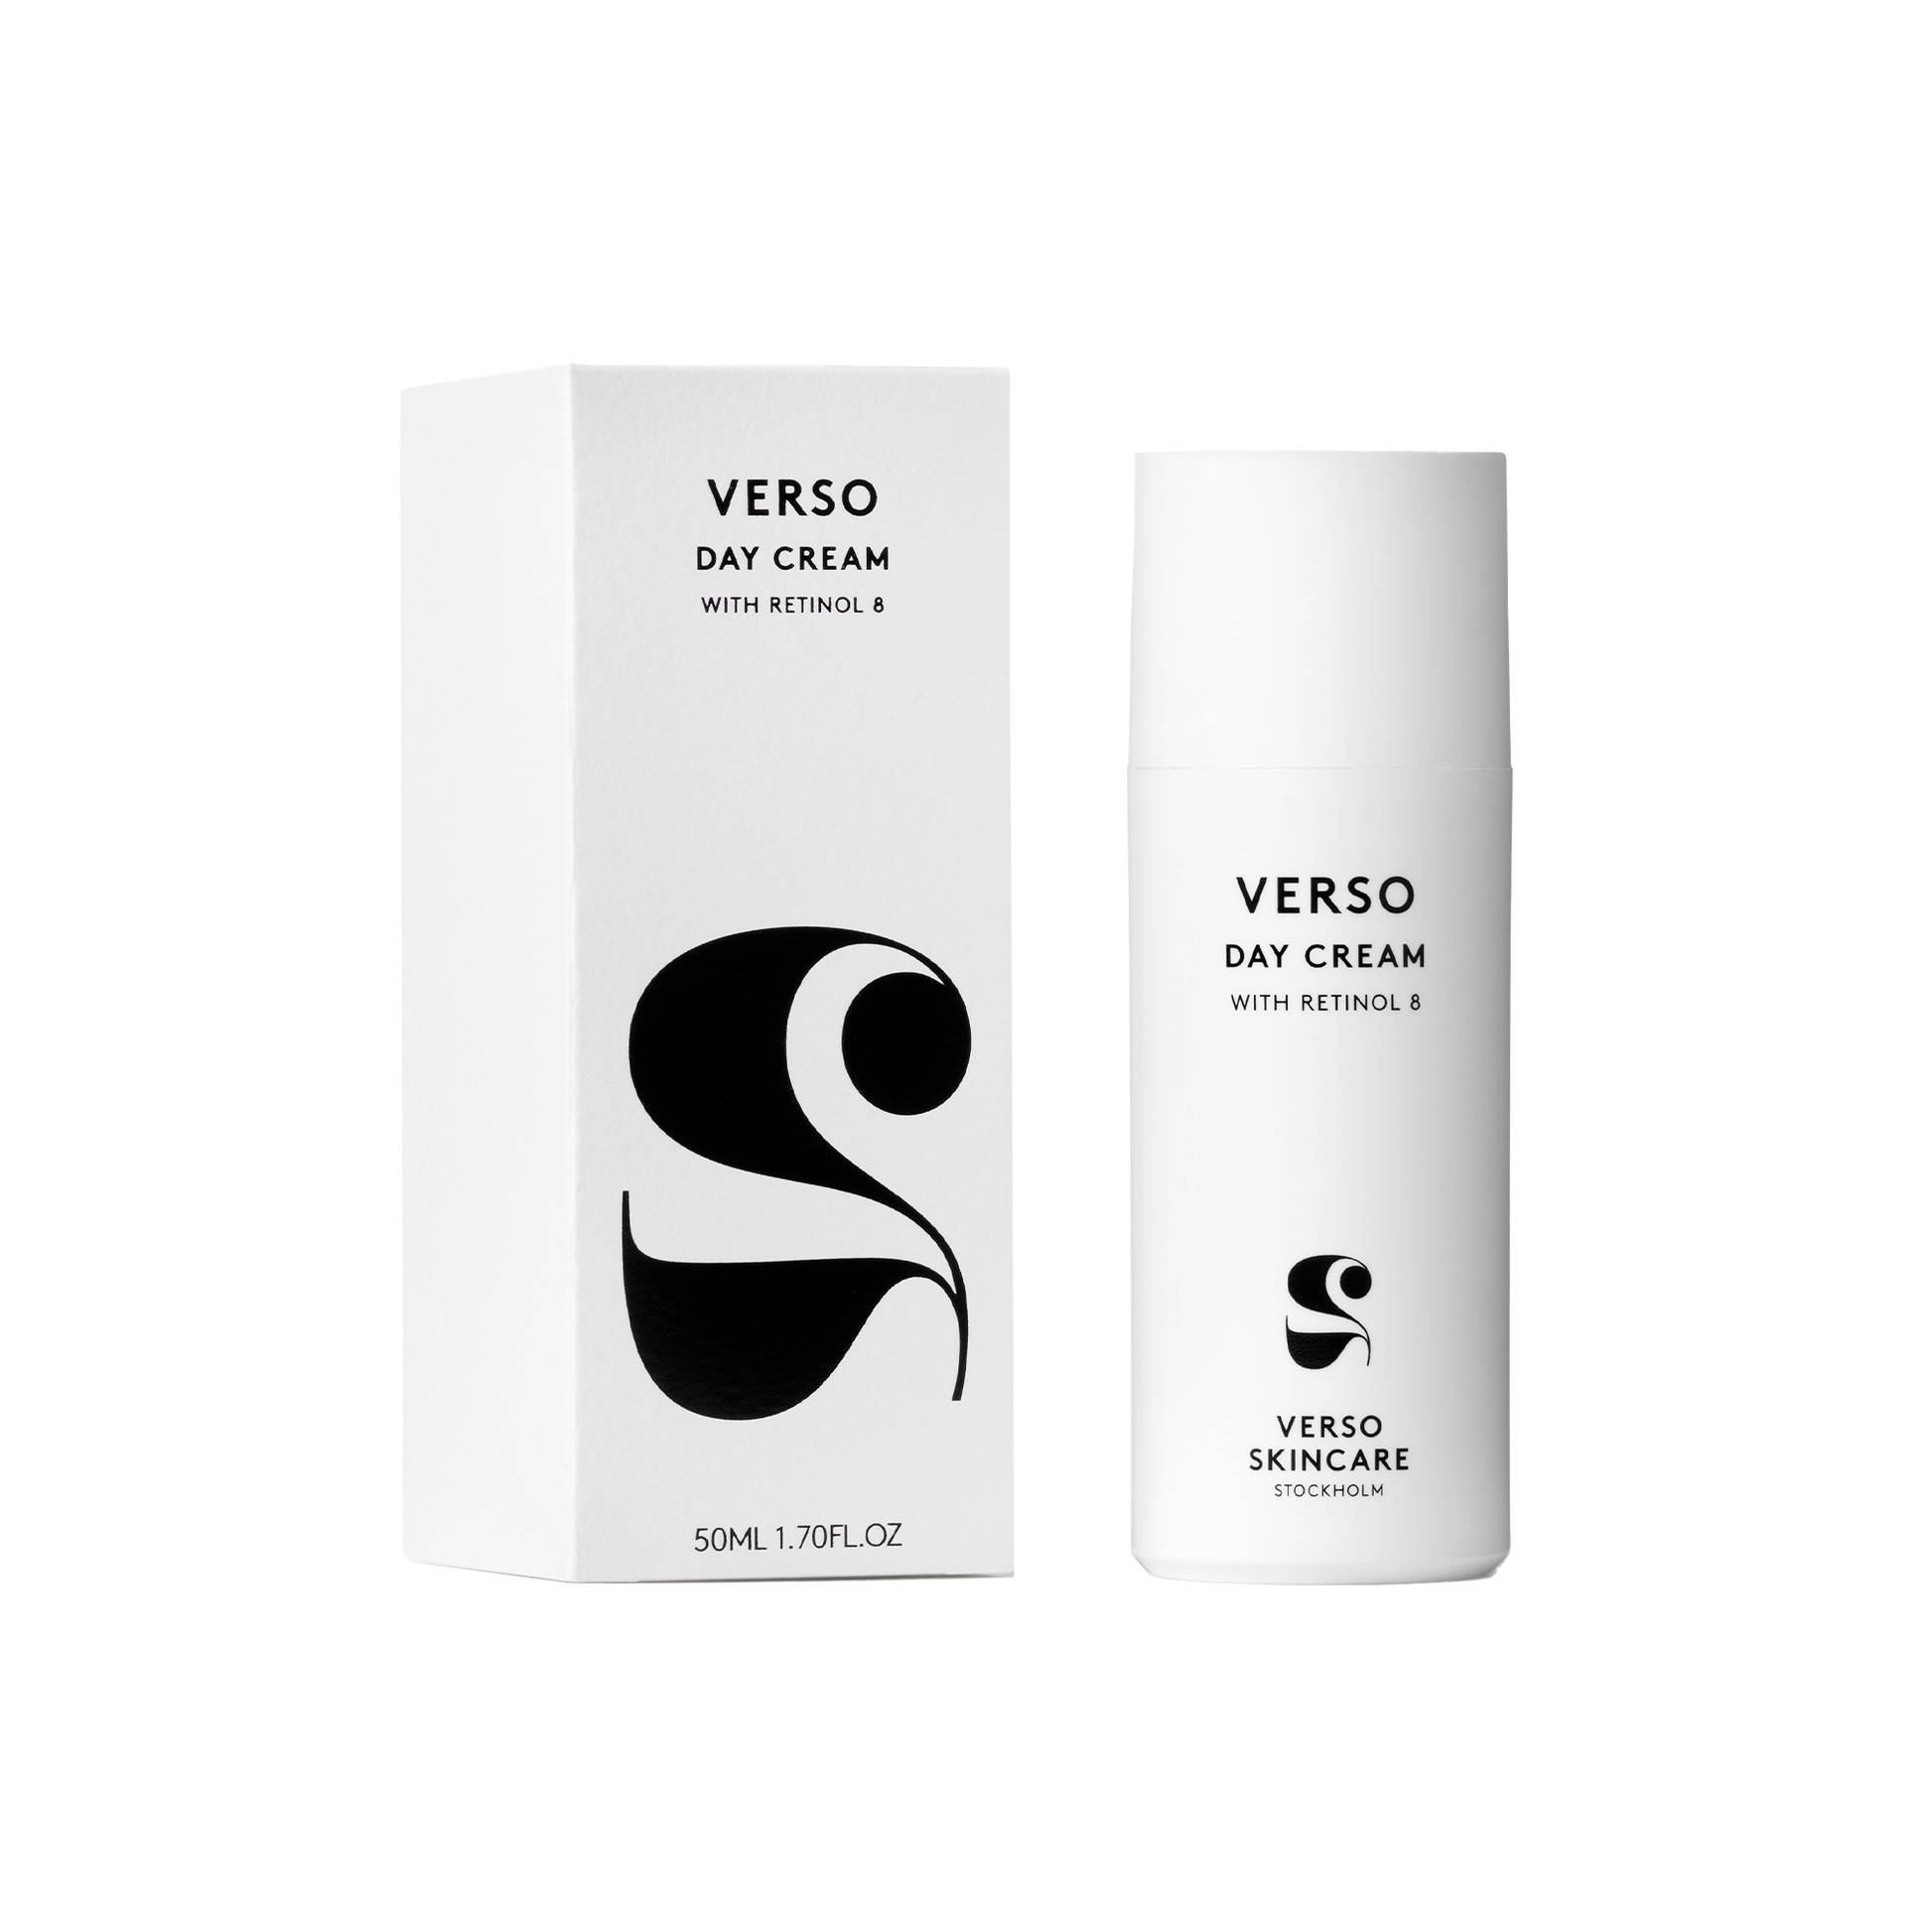 Verso Day Cream: Moisturizing and protecting cream that leaves the skin looking radiant and well-hydrated. Visibly reduces the signs of premature aging and protects the skin from the visible effects of daily external stressors. Leaves the skin soft with an increased youthful appearance. Formulated with antioxidants to further enhance the product’s effectiveness and the visible results.